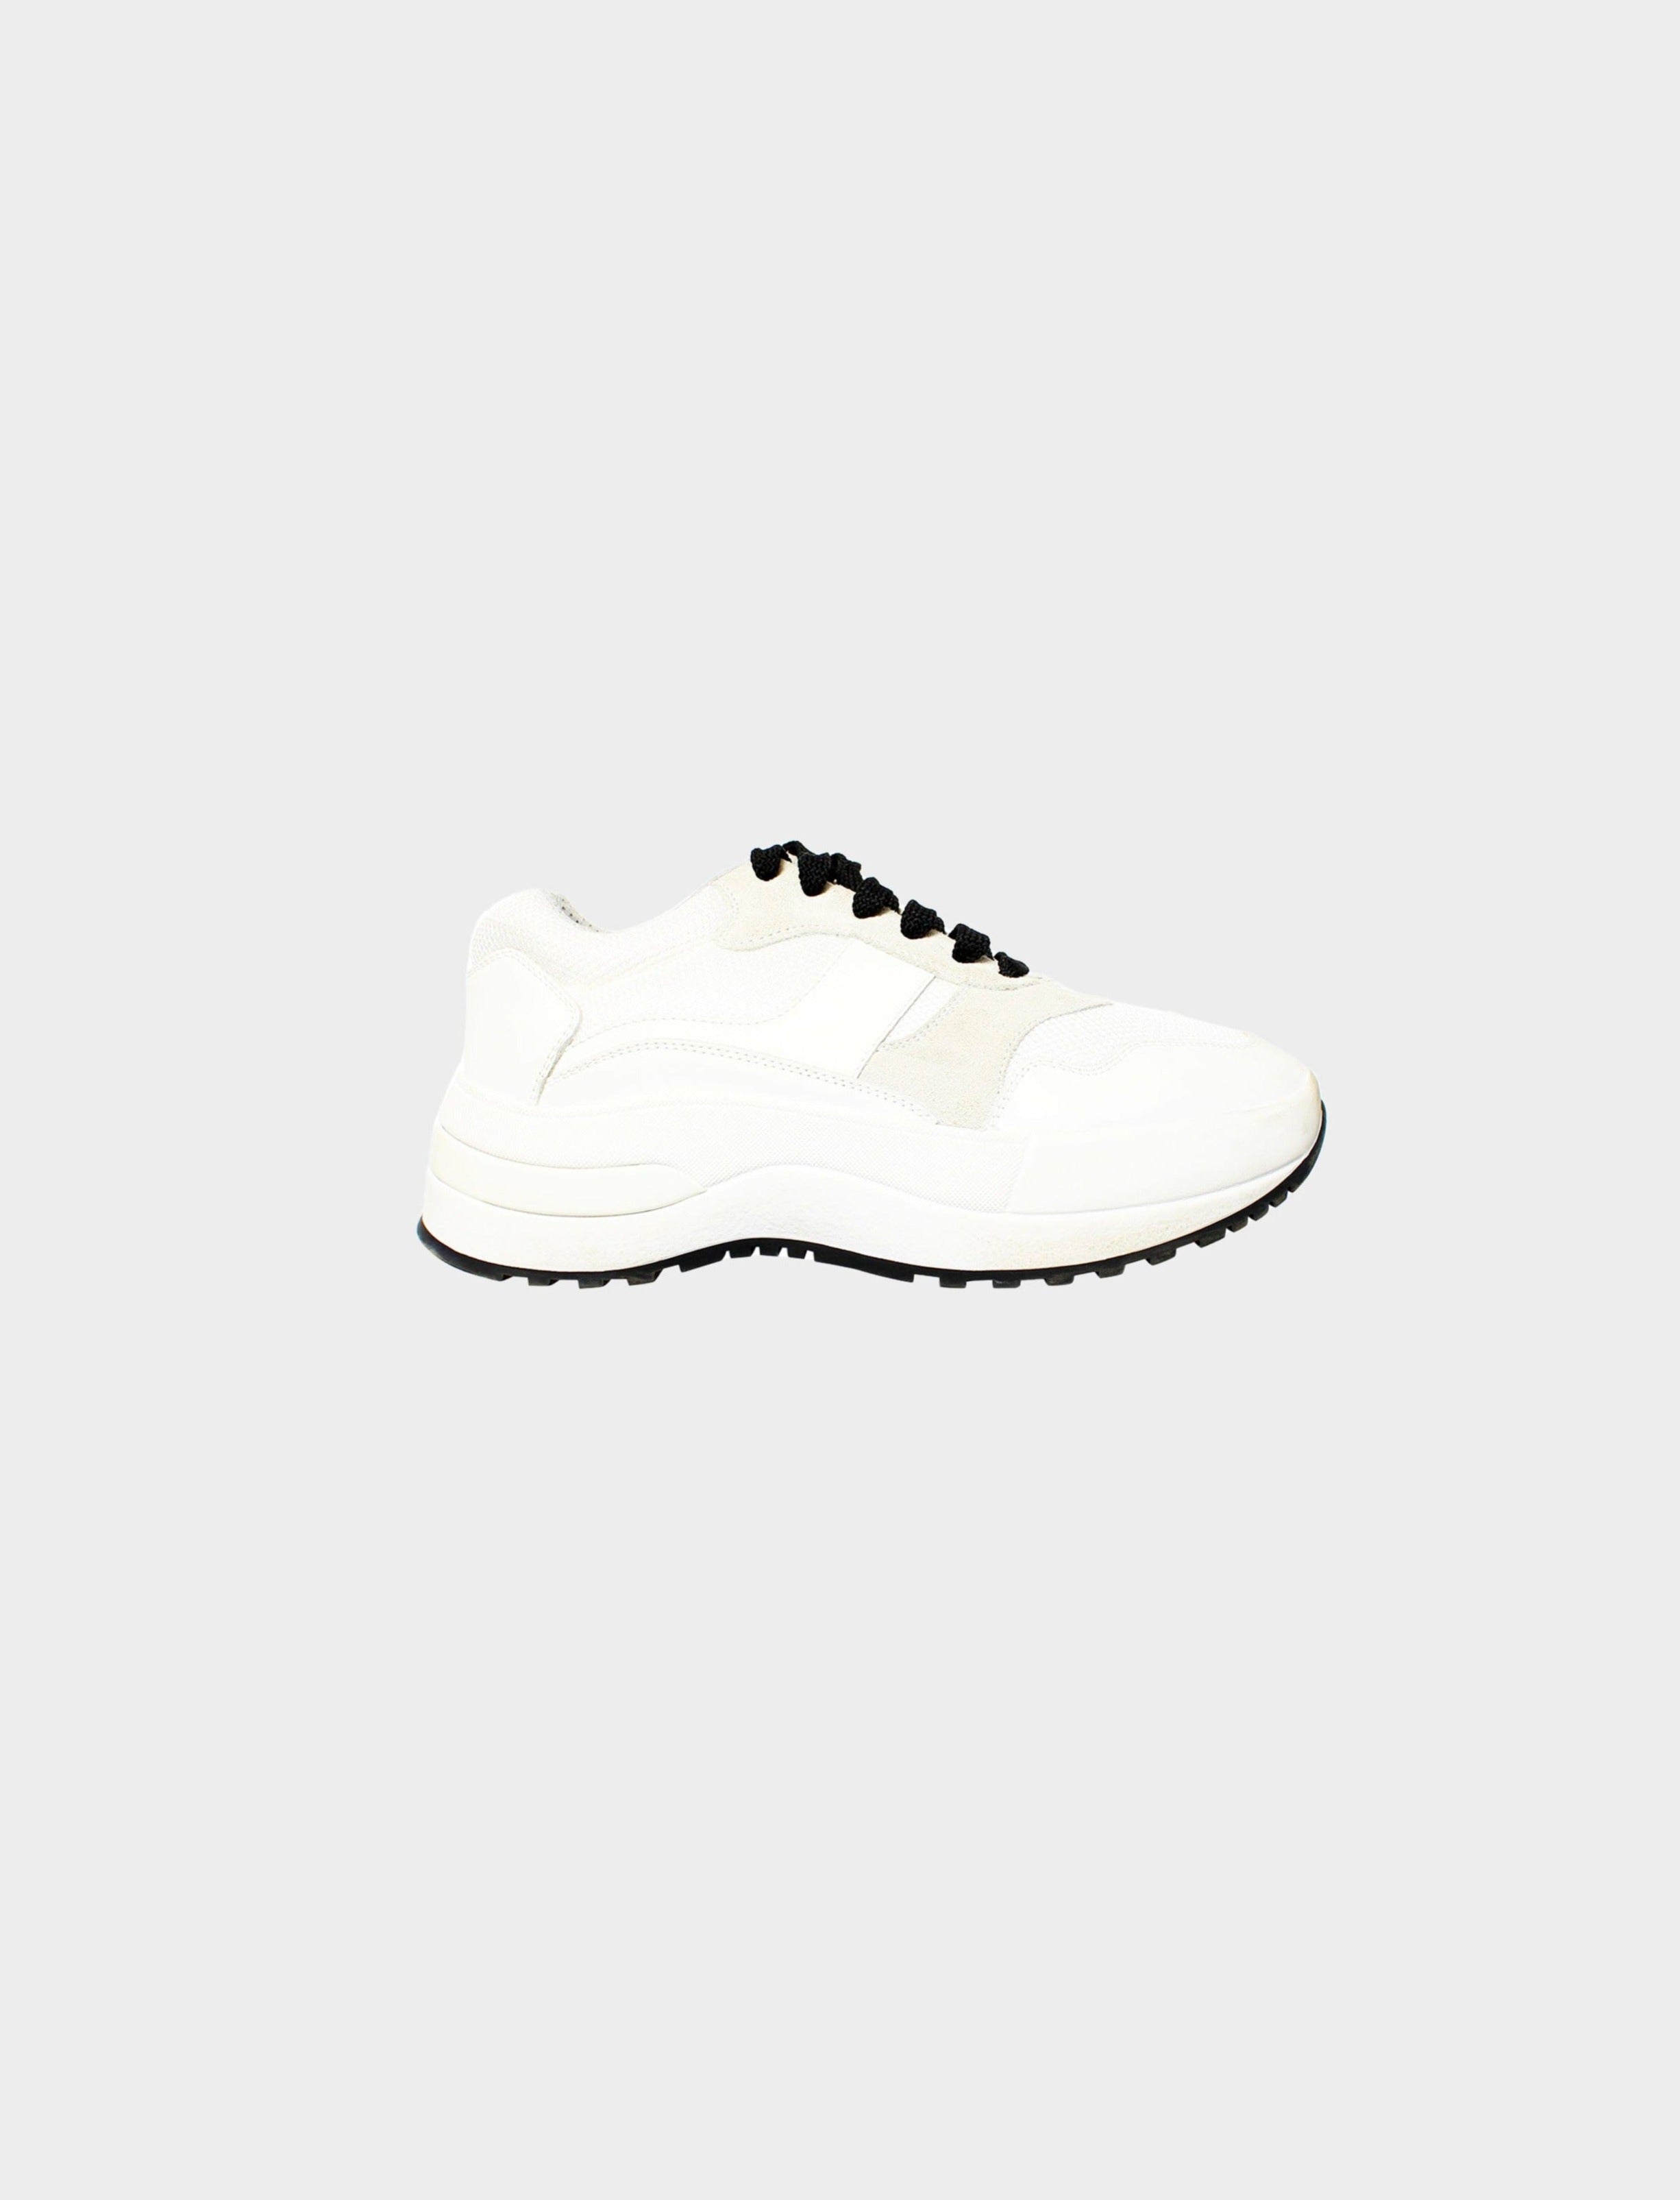 Invitere national Uafhængig Céline by Phoebe Philo SS 2018 Delivery Sneakers · INTO